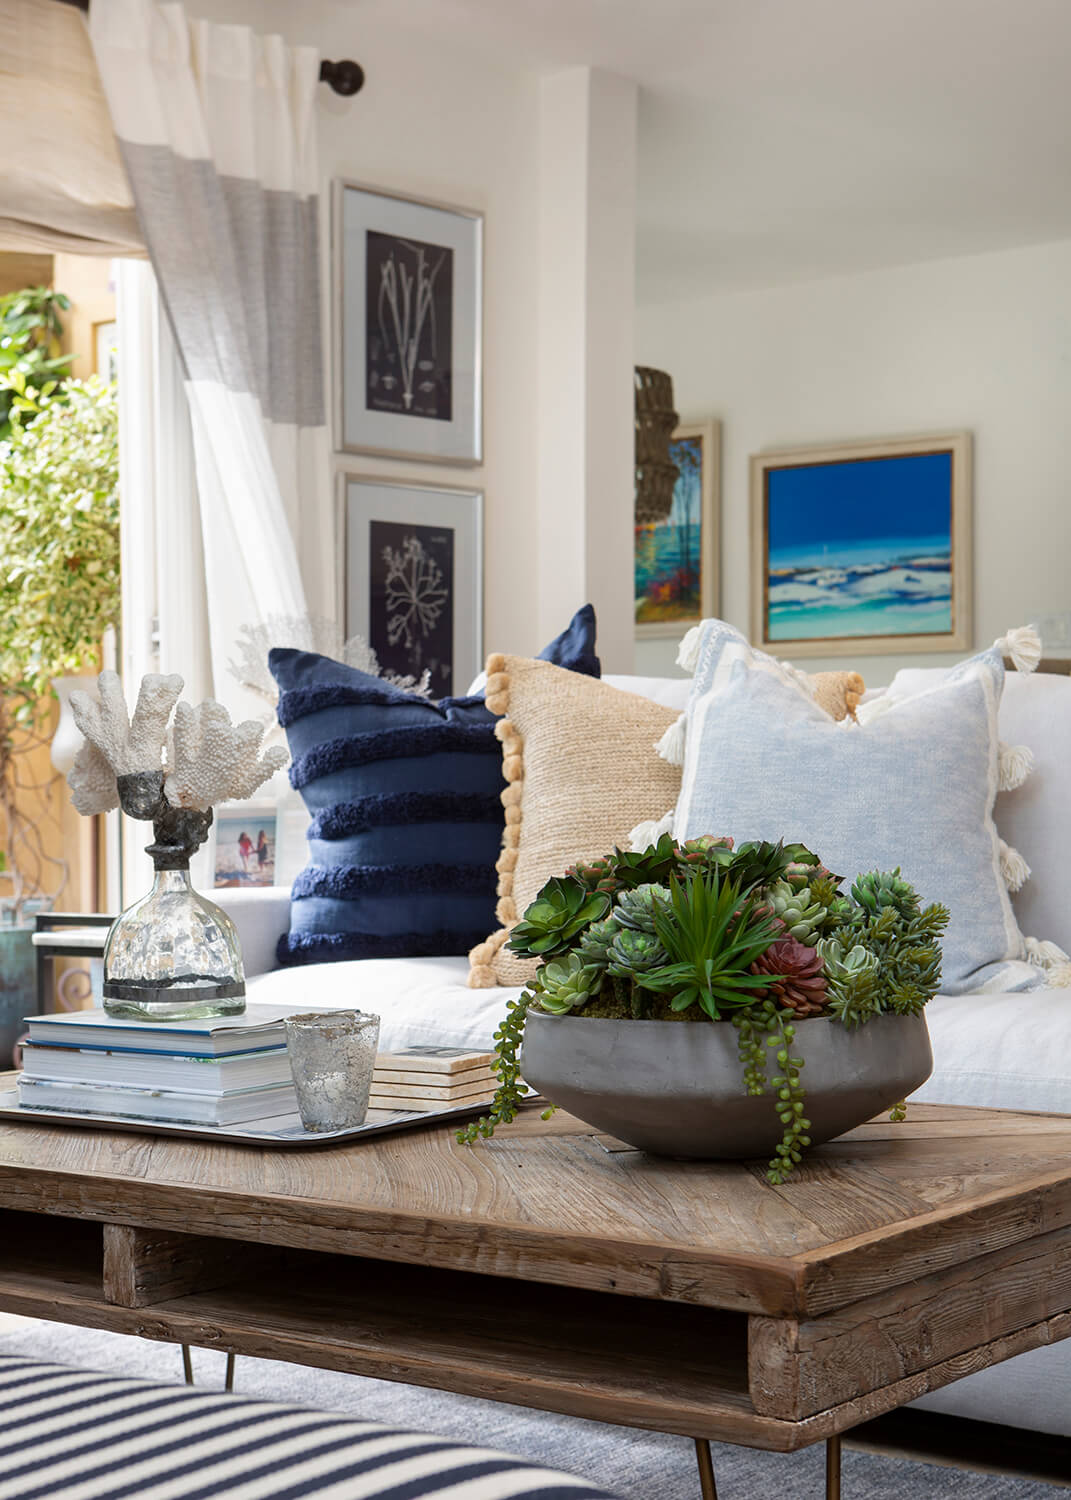 A Coastal style living room with driftwood accents, throw pillows, and, nautical details.